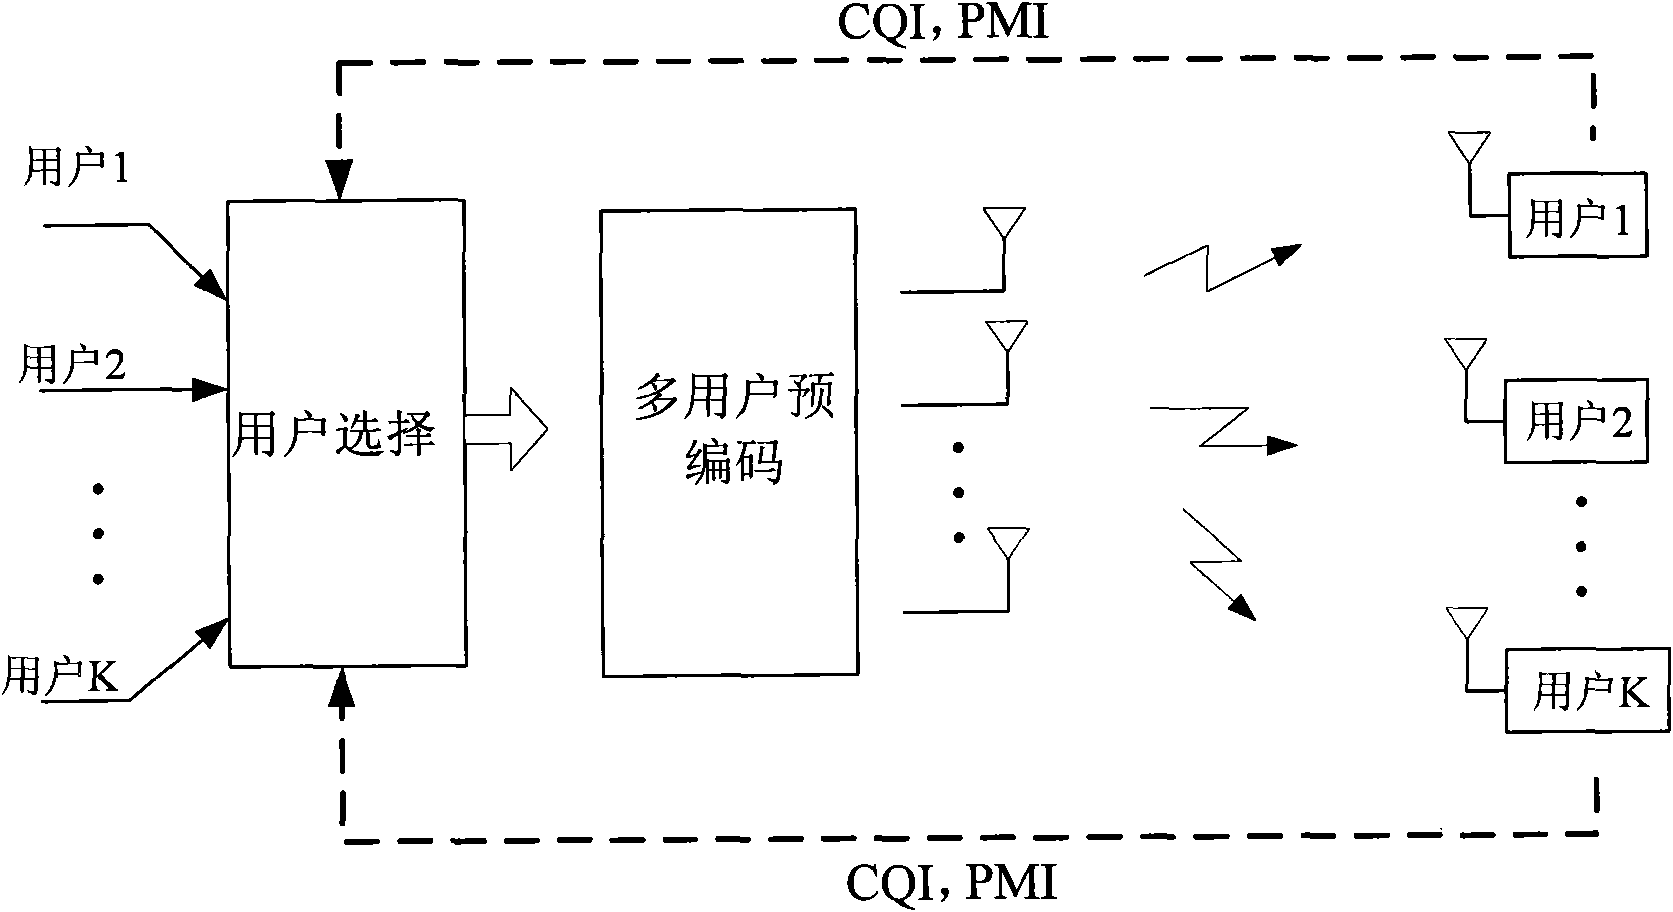 User selecting method of multi-user MIMO communication system based on codebook